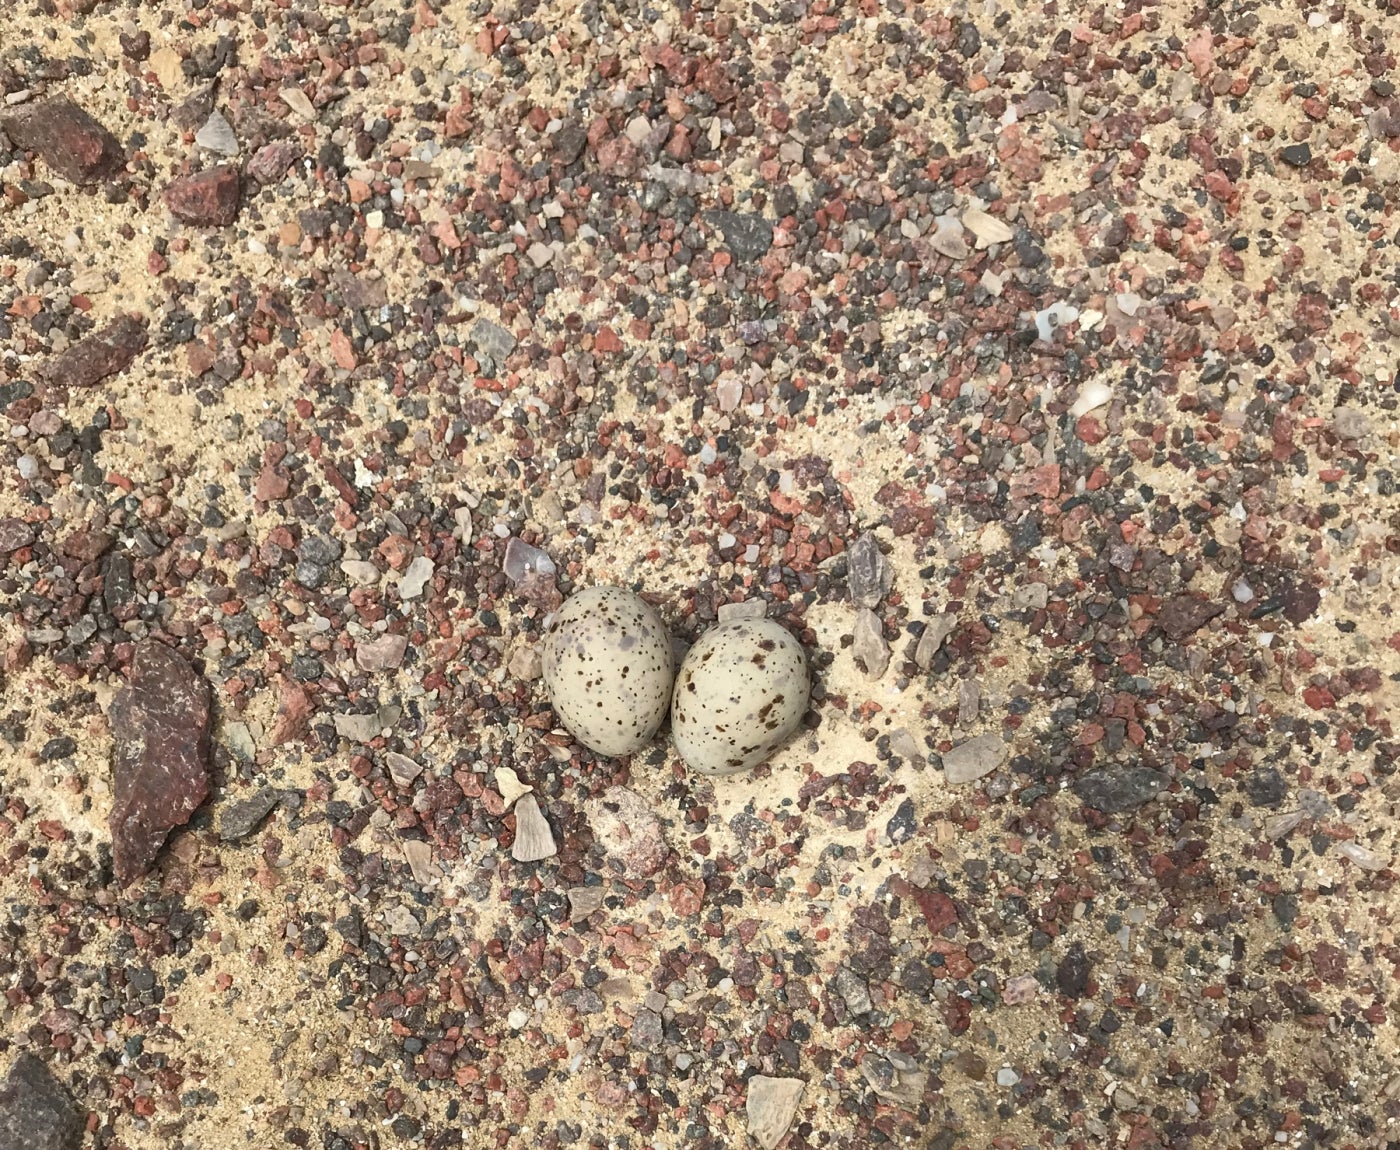 A Peruvian tern nest containing two tiny eggs, each with spotted coloration that matches the ground.